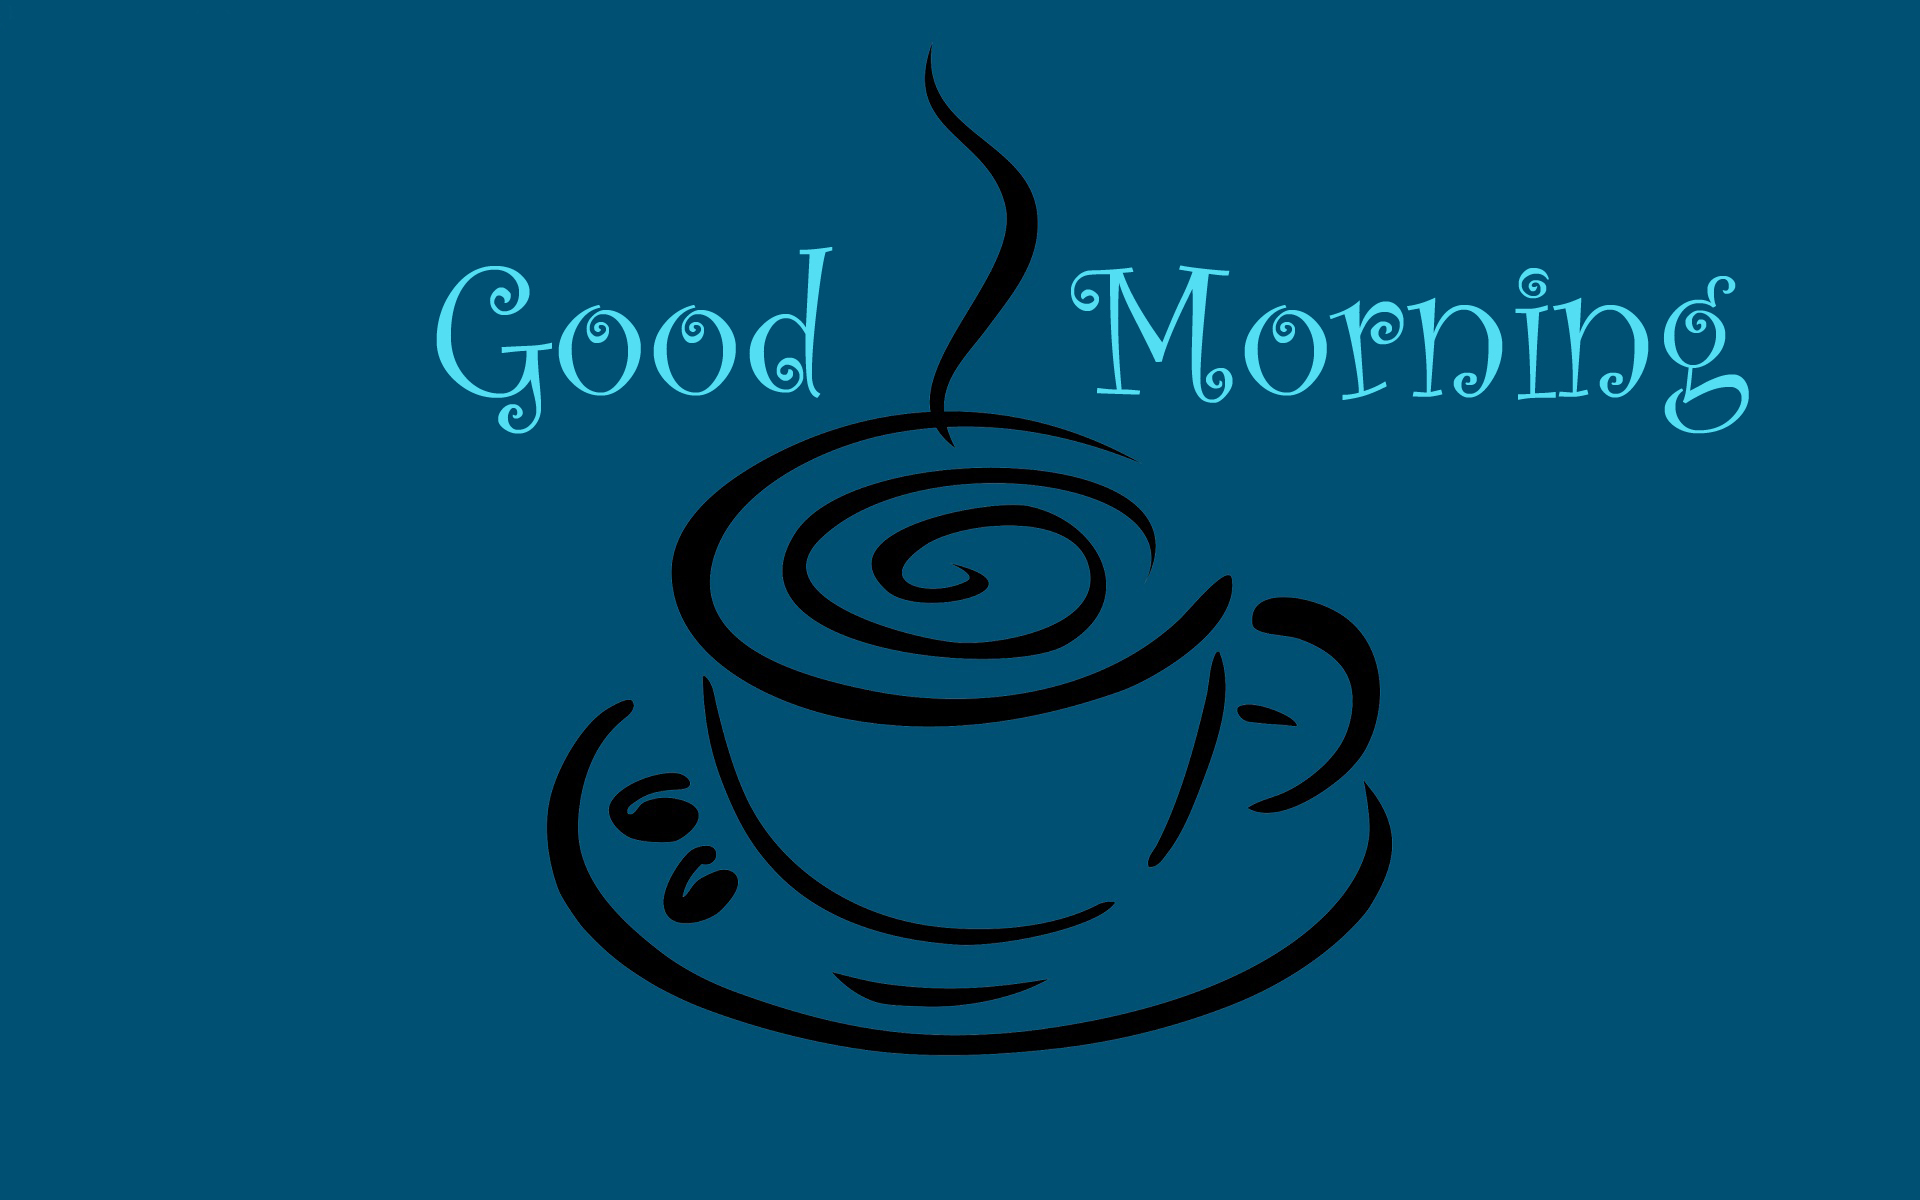 Good morning coffee clip art hd wallpapers